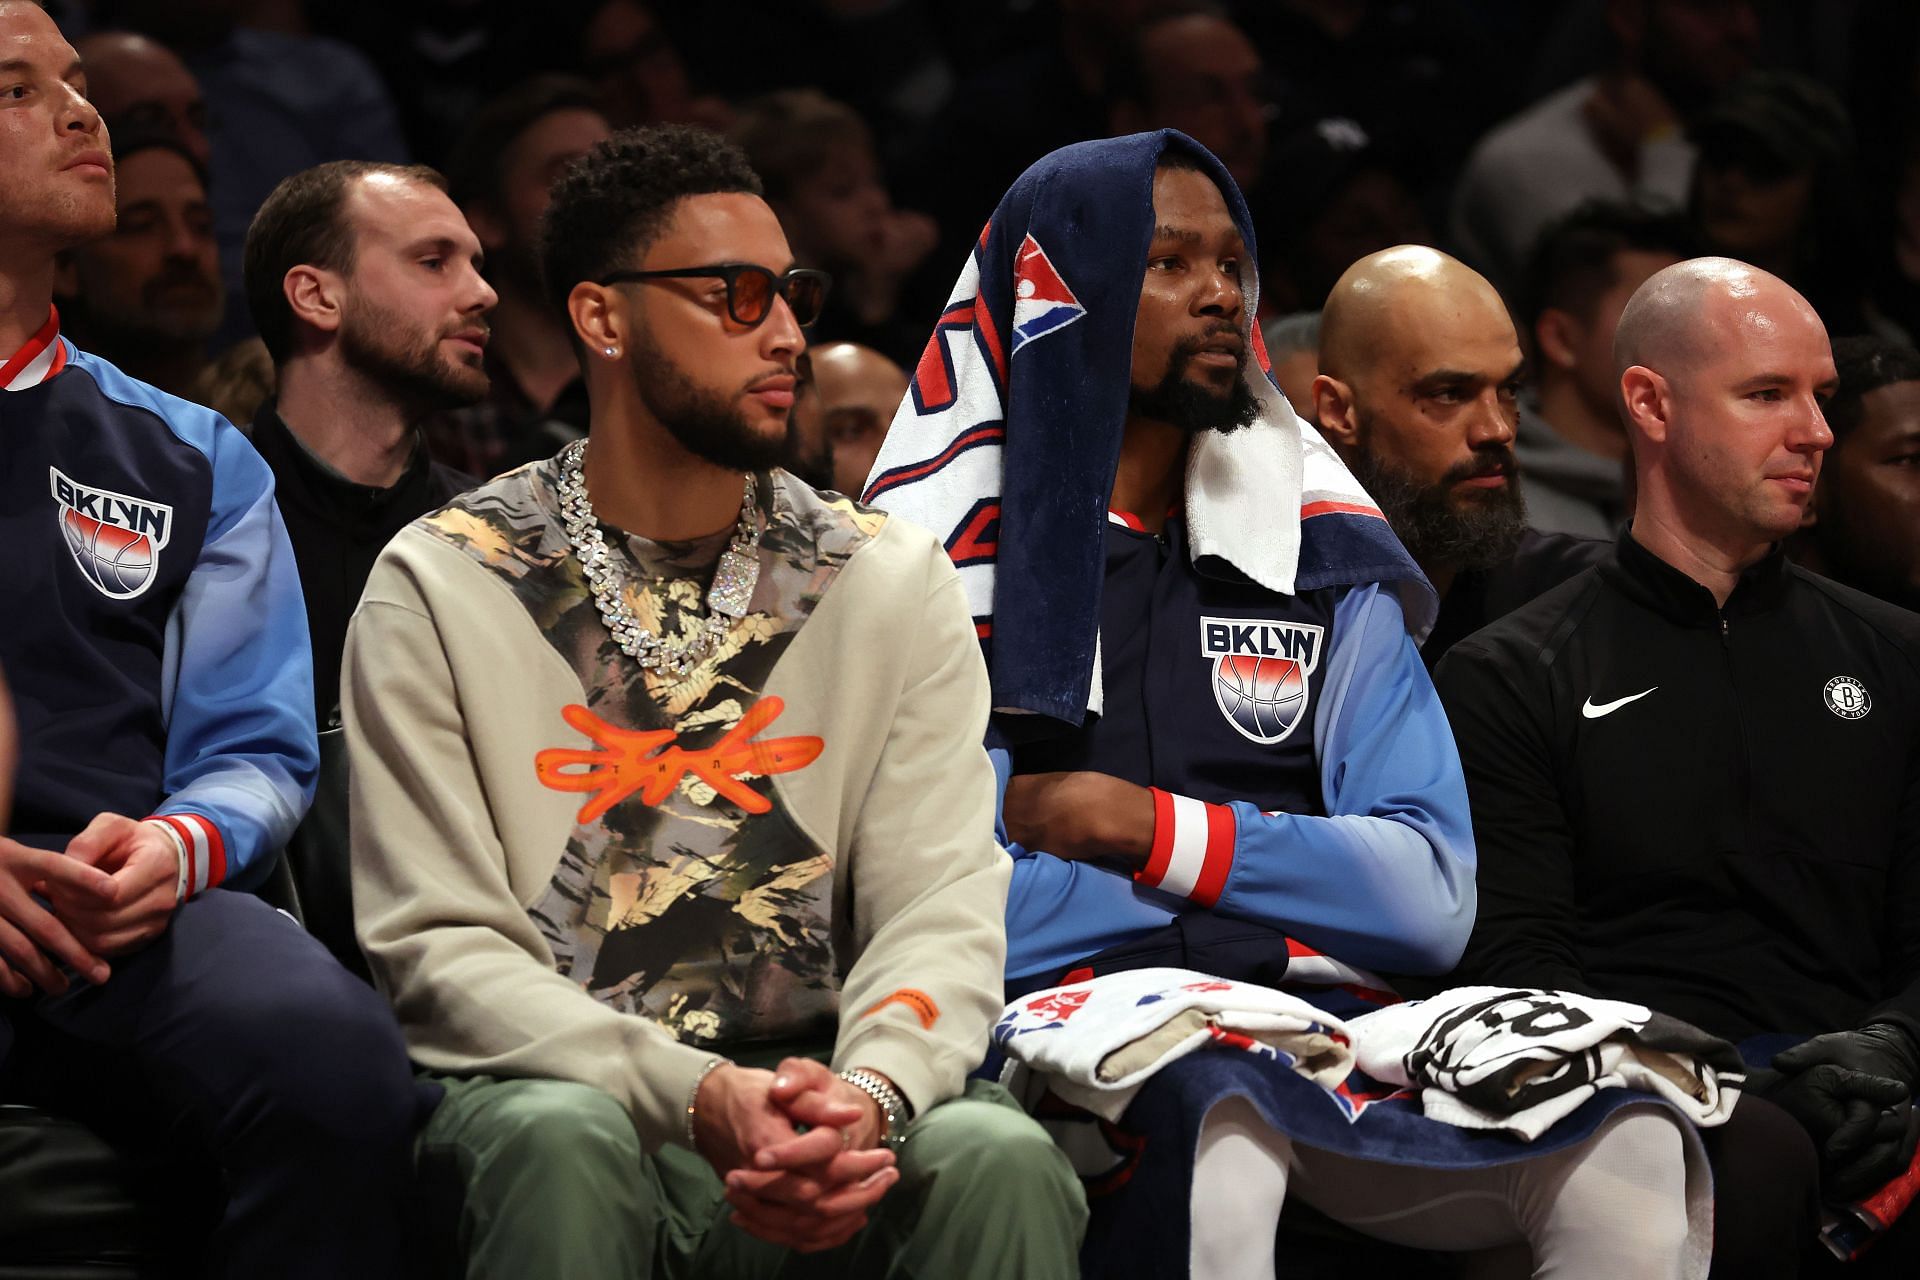 Ben Simmons and Kevin Durant watch on from the sidelines during the Milwaukee Bucks v Brooklyn Nets game.